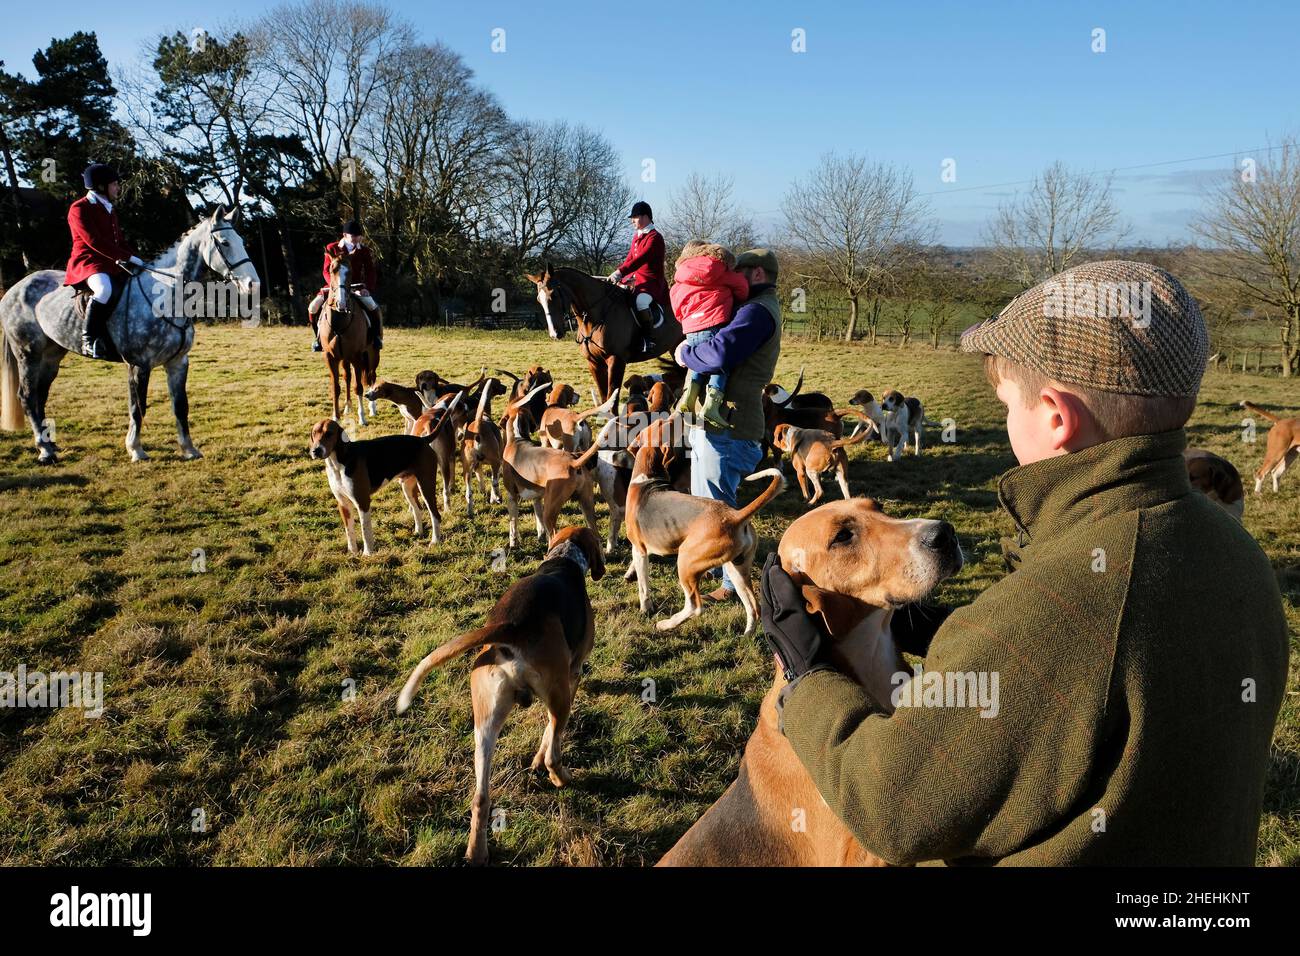 Mcc0102940 The Woodland Pytchley Hunt at Dingley, Northants., 4th December, 2021. Photo John Robertson for The Telegraph. Stock Photo